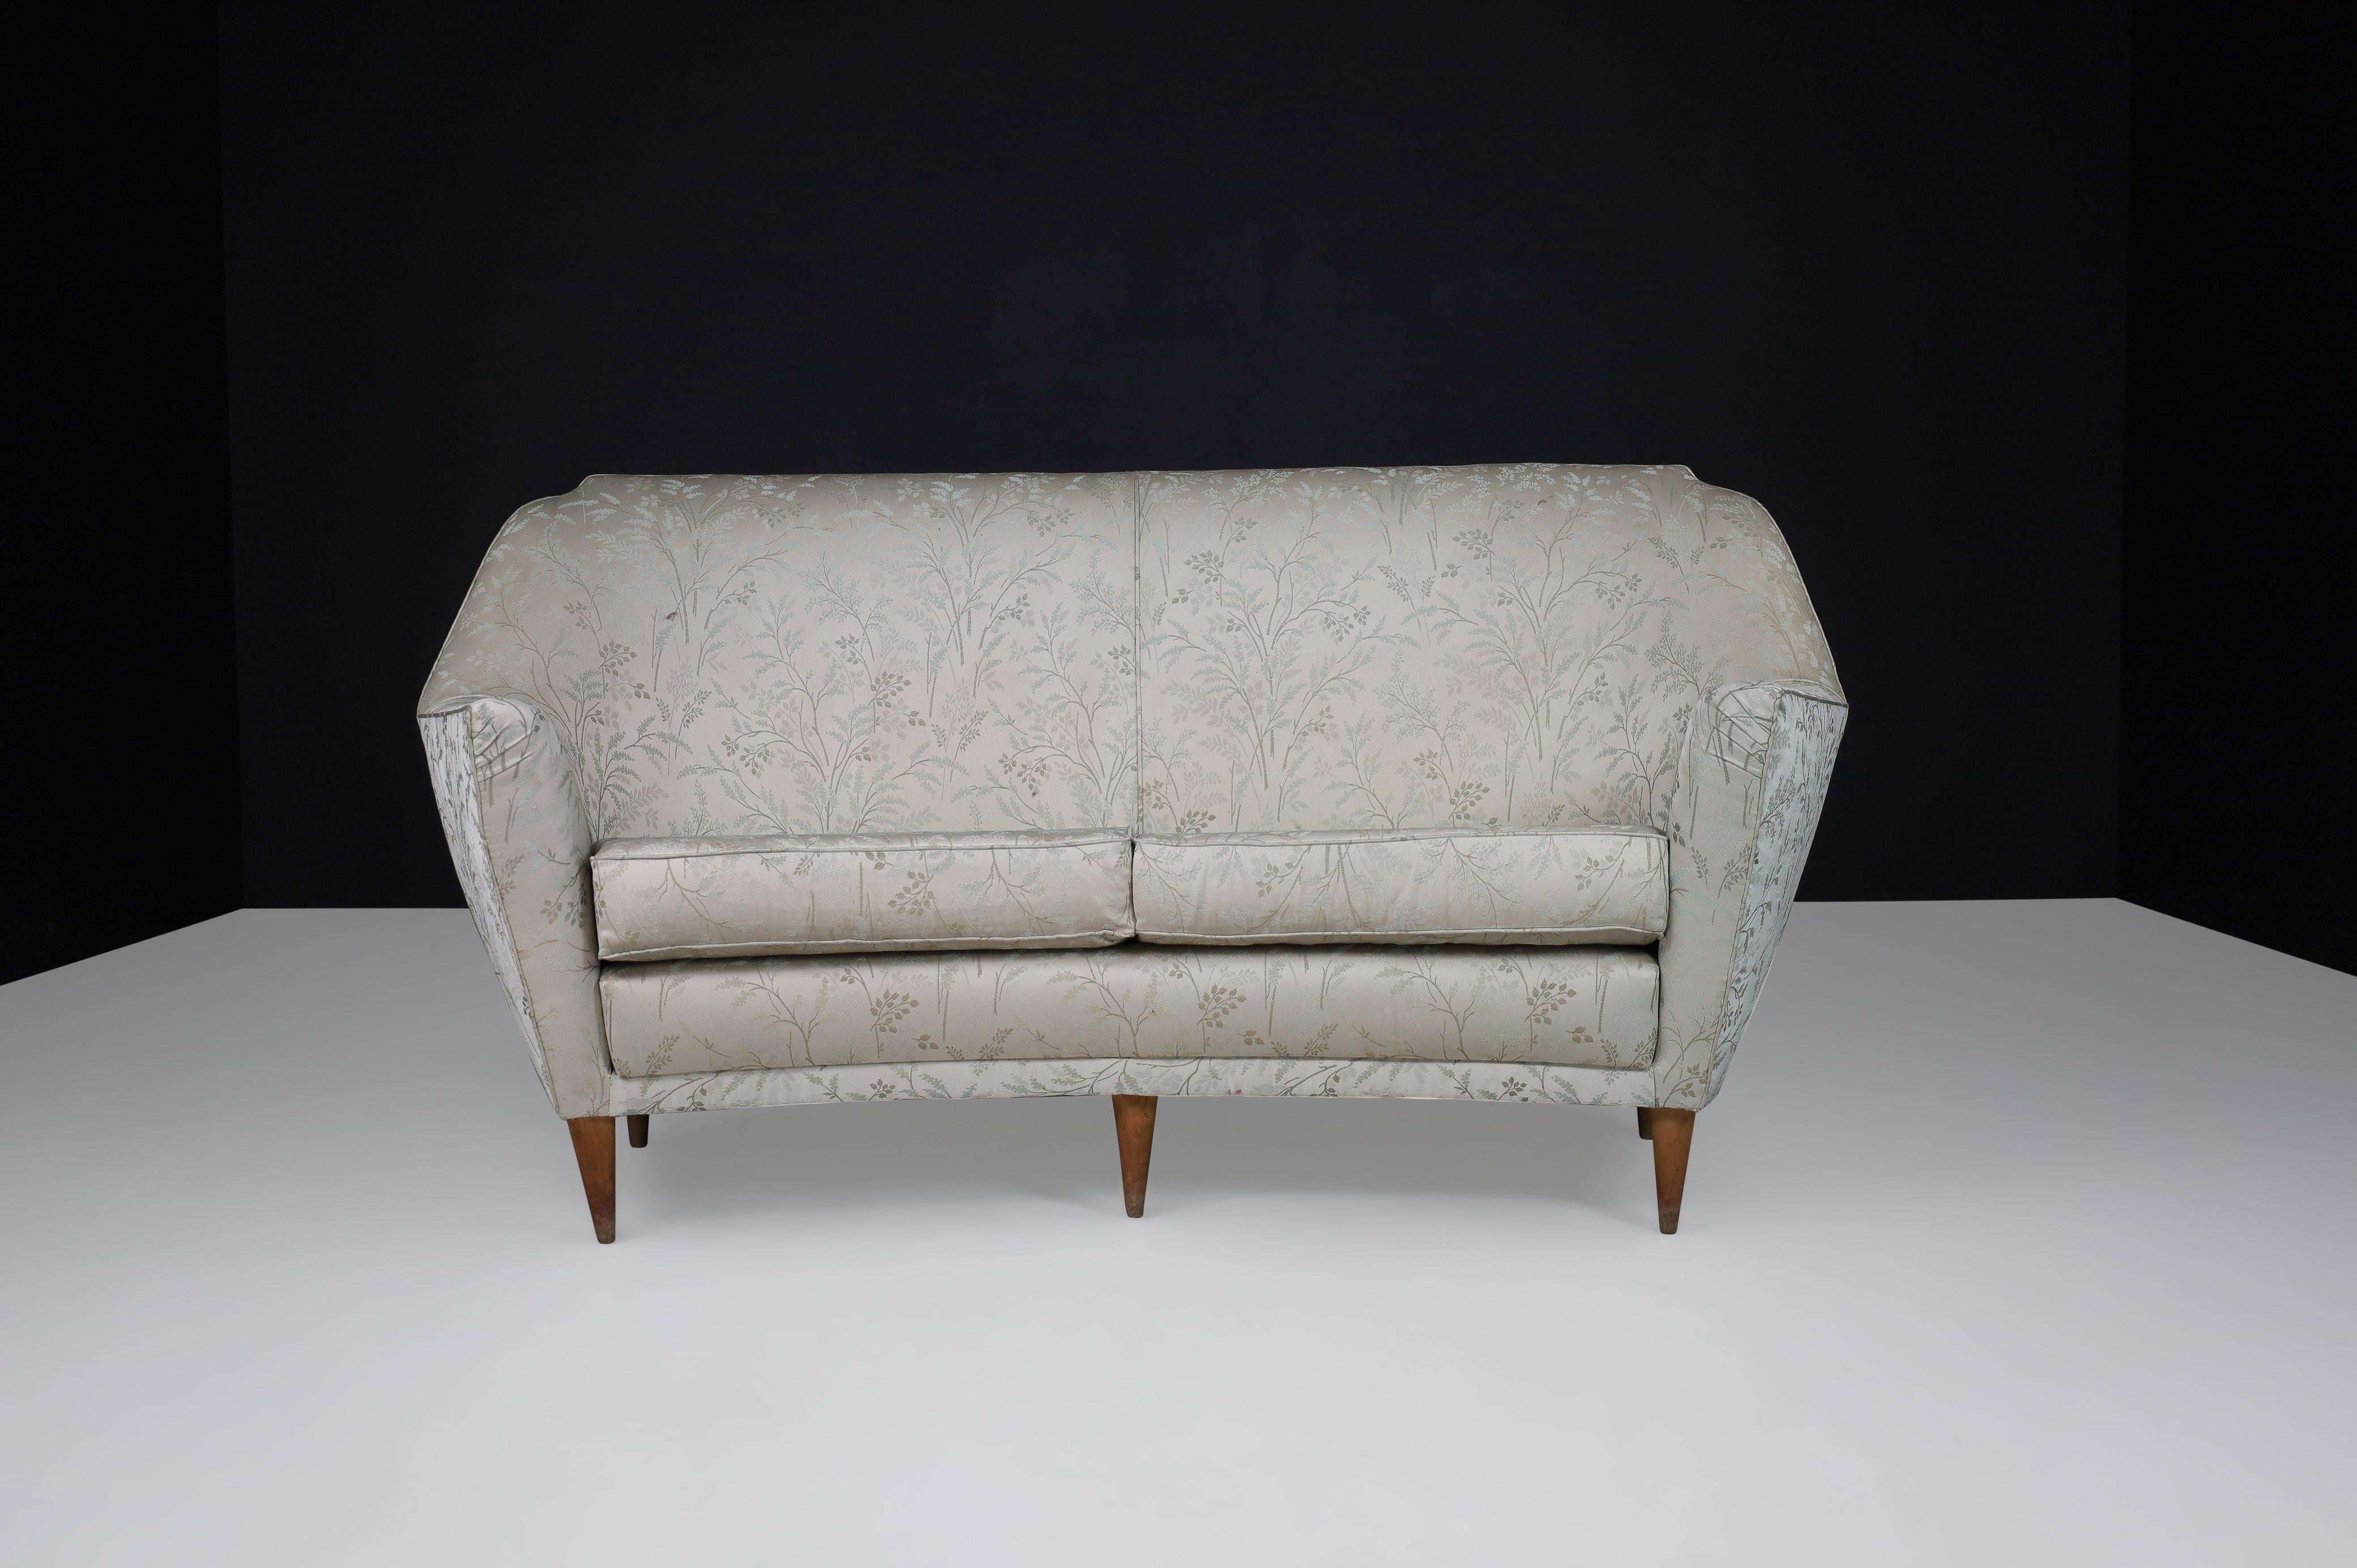 Ico Parisi Sofa in Leaf Motif Fabric and Tapered Wooden Legs, Italy, 1950s For Sale 7